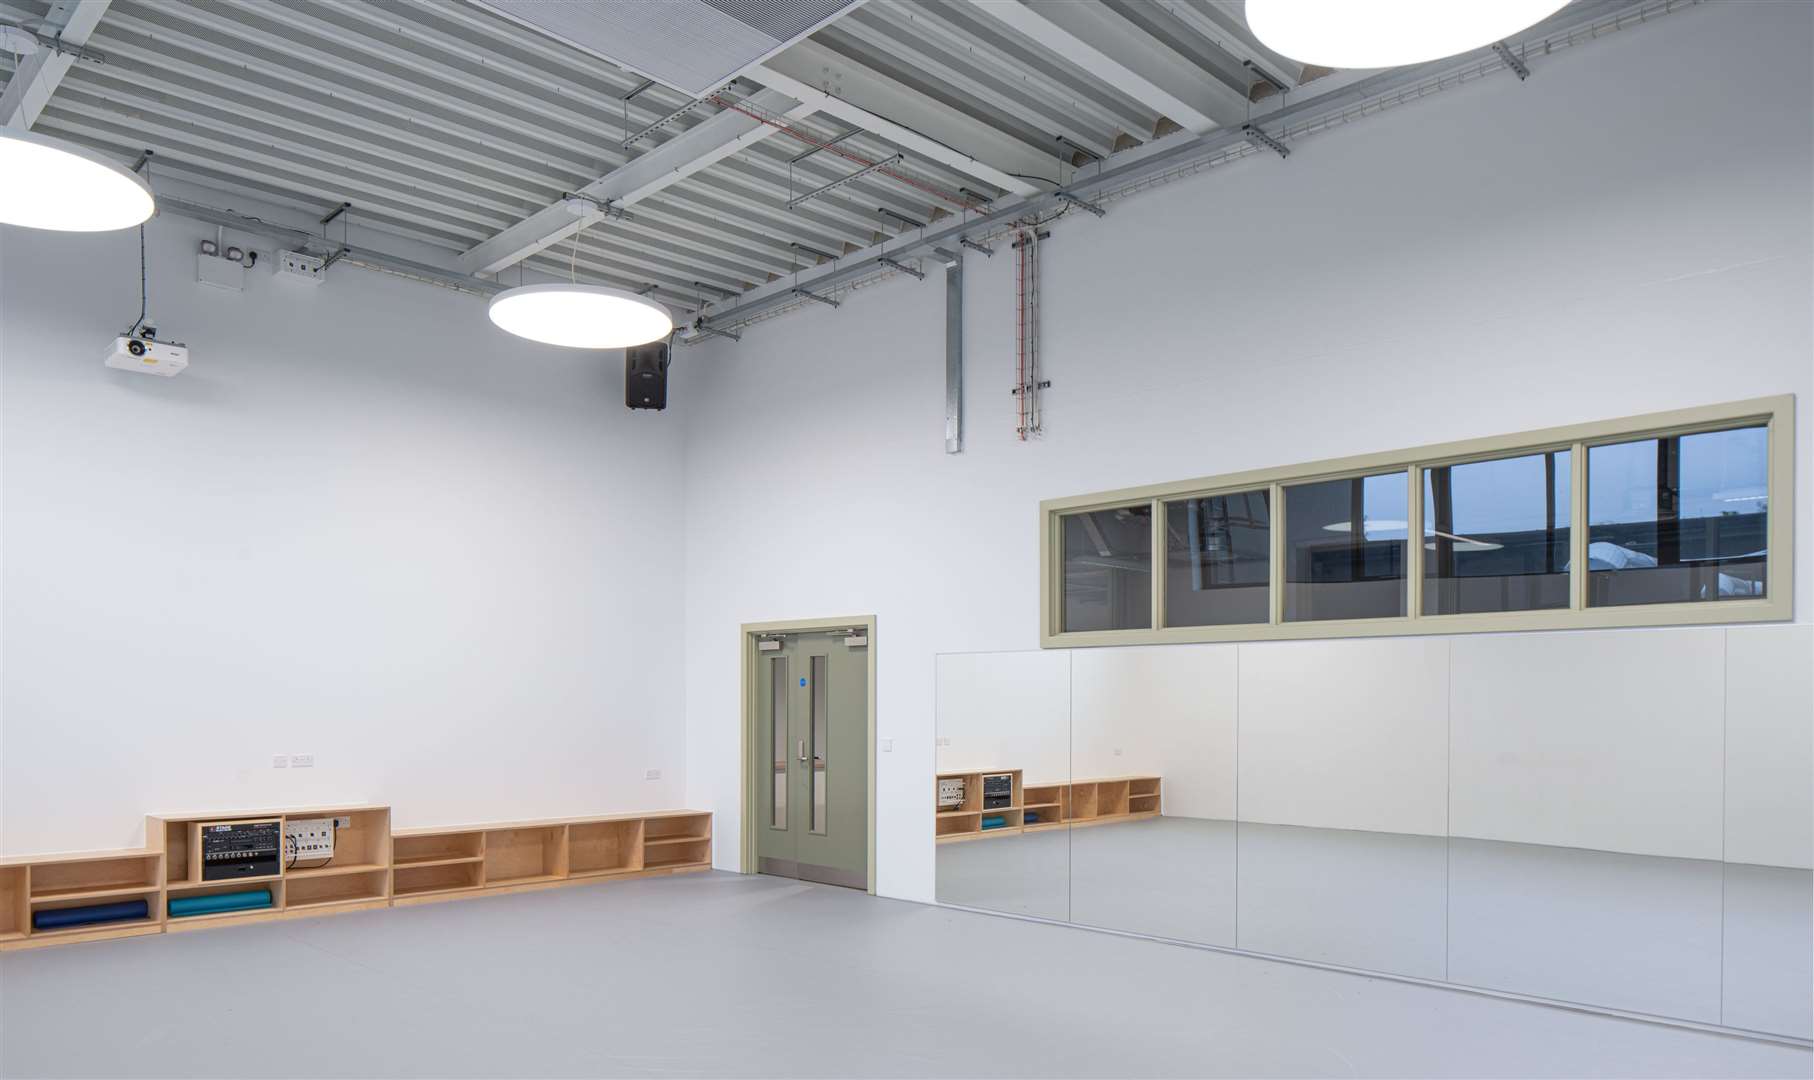 JV3, the space which can be hired by the community for classes